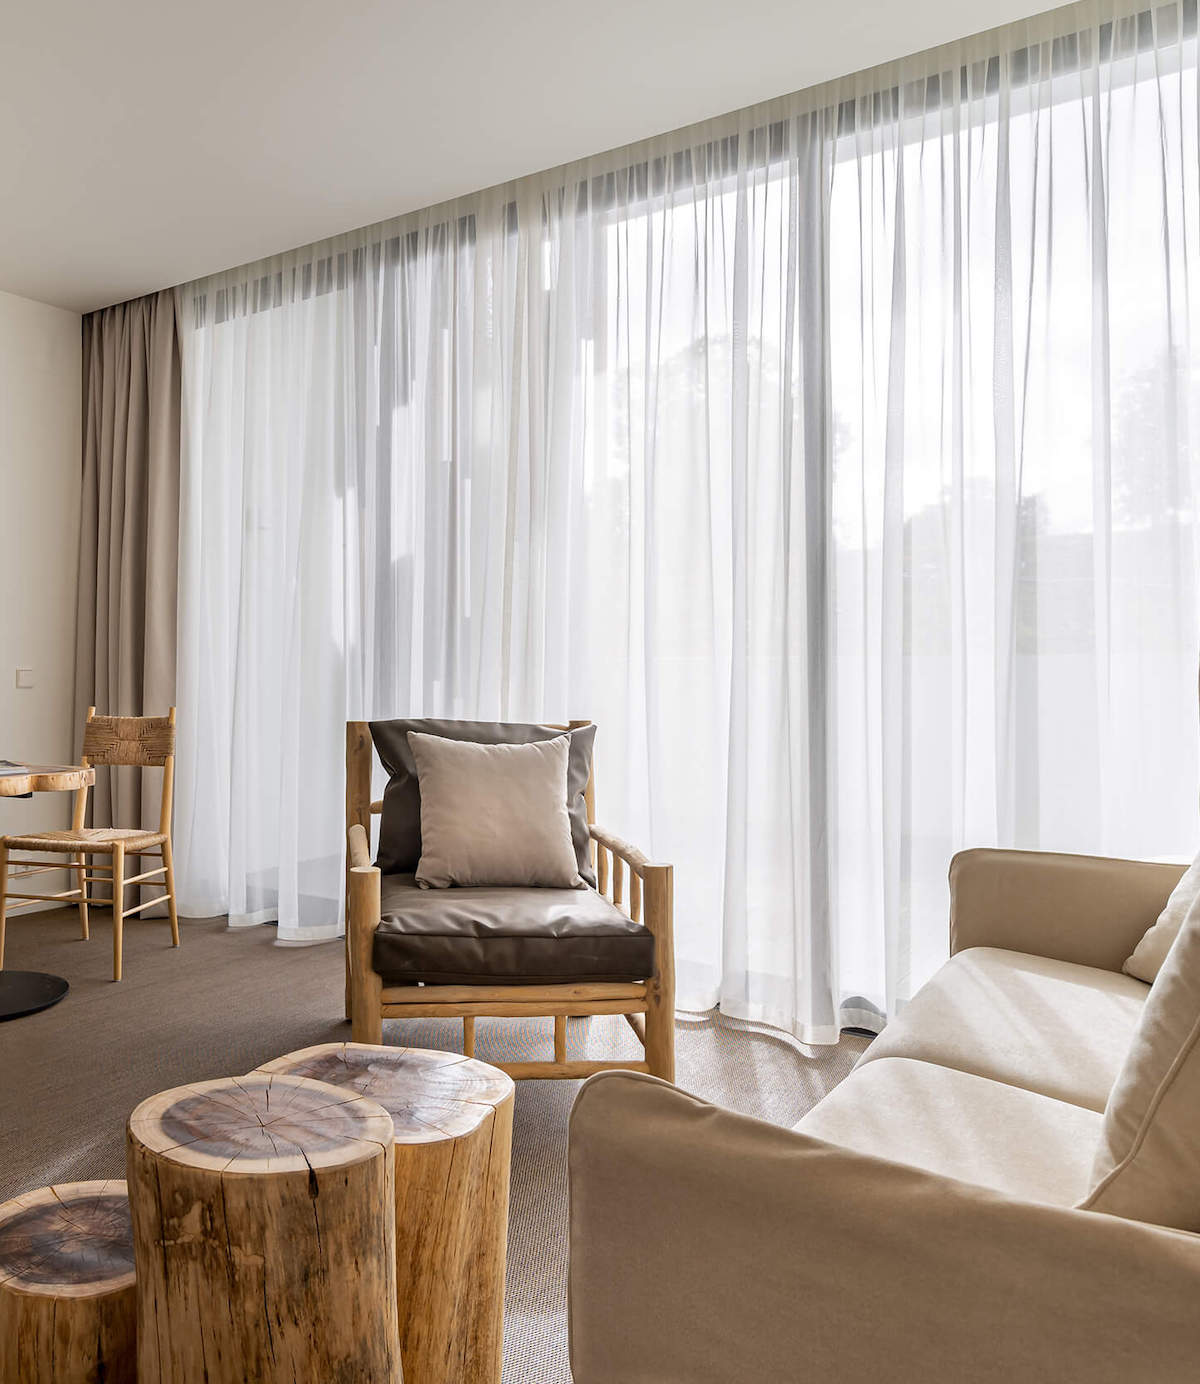 Nature-inspired furniture in suite